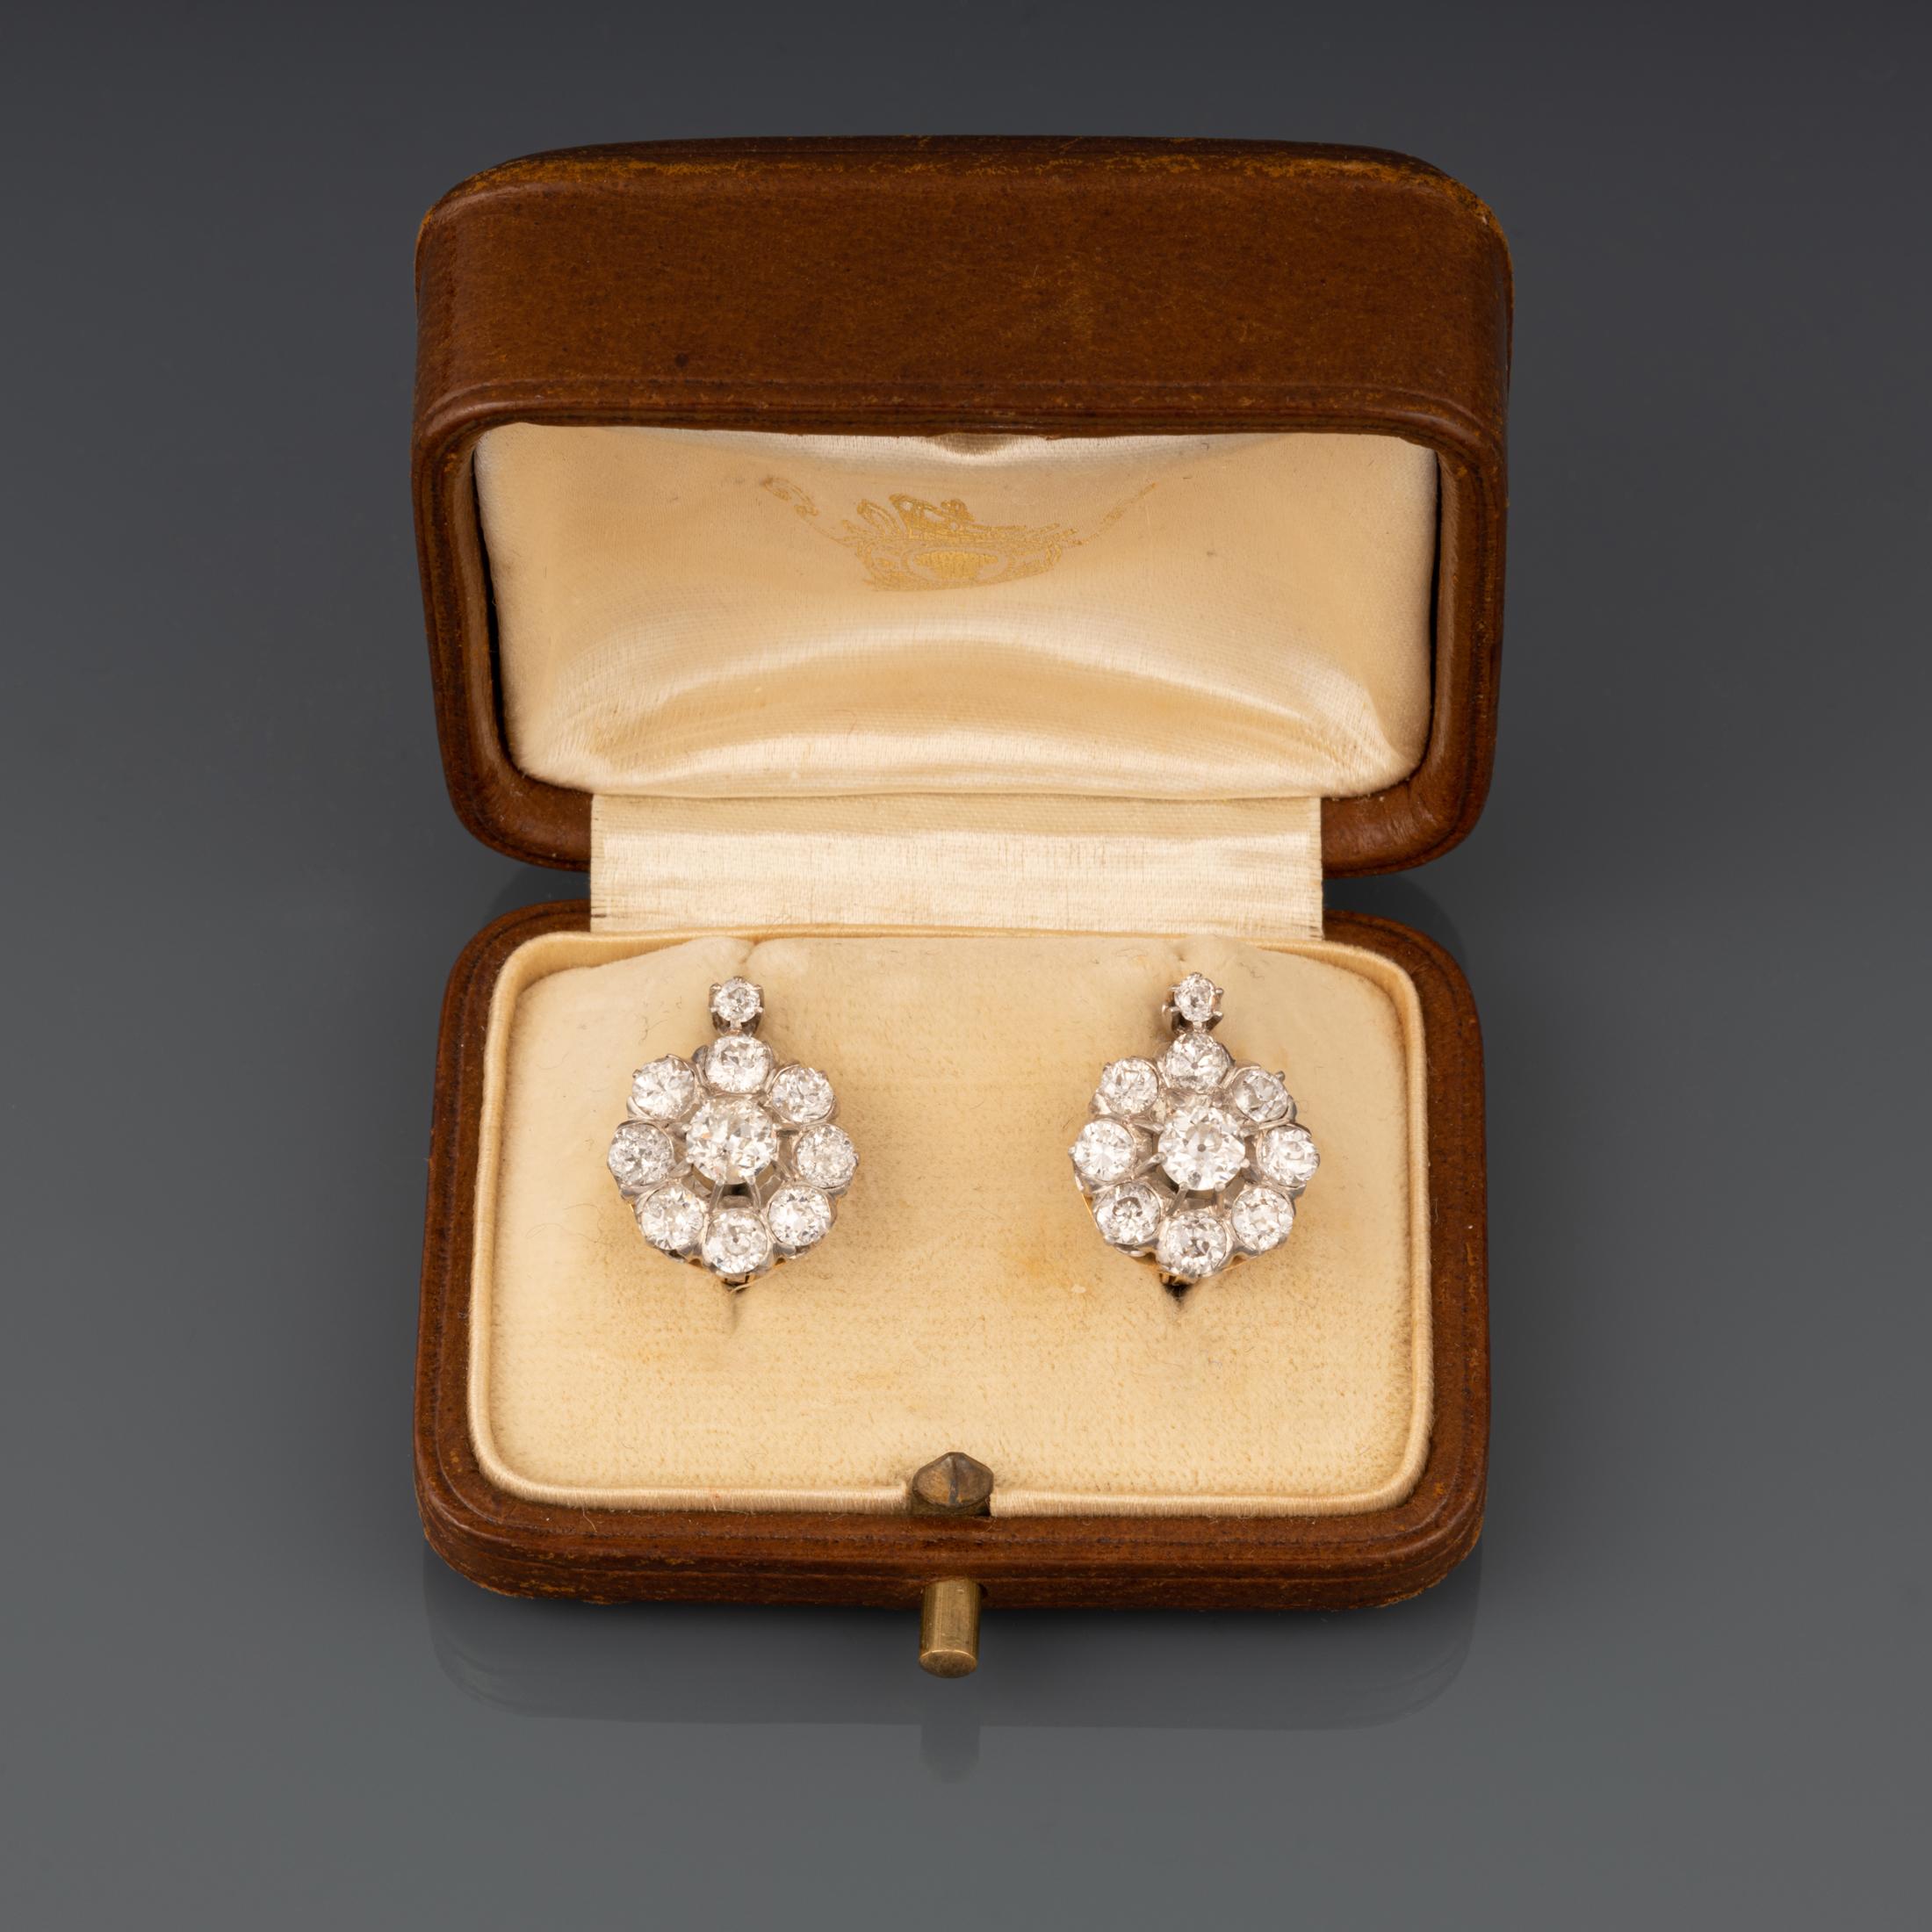 A lovely pair of antique diamonds earrings, made in France circa 1890.

Made in yellow and white gold 18k(eagle head hallmarks).

The diamonds weights 1.50 Carats per earrings approximately (8*0.15 +0.30 per earring).

The quality is white color